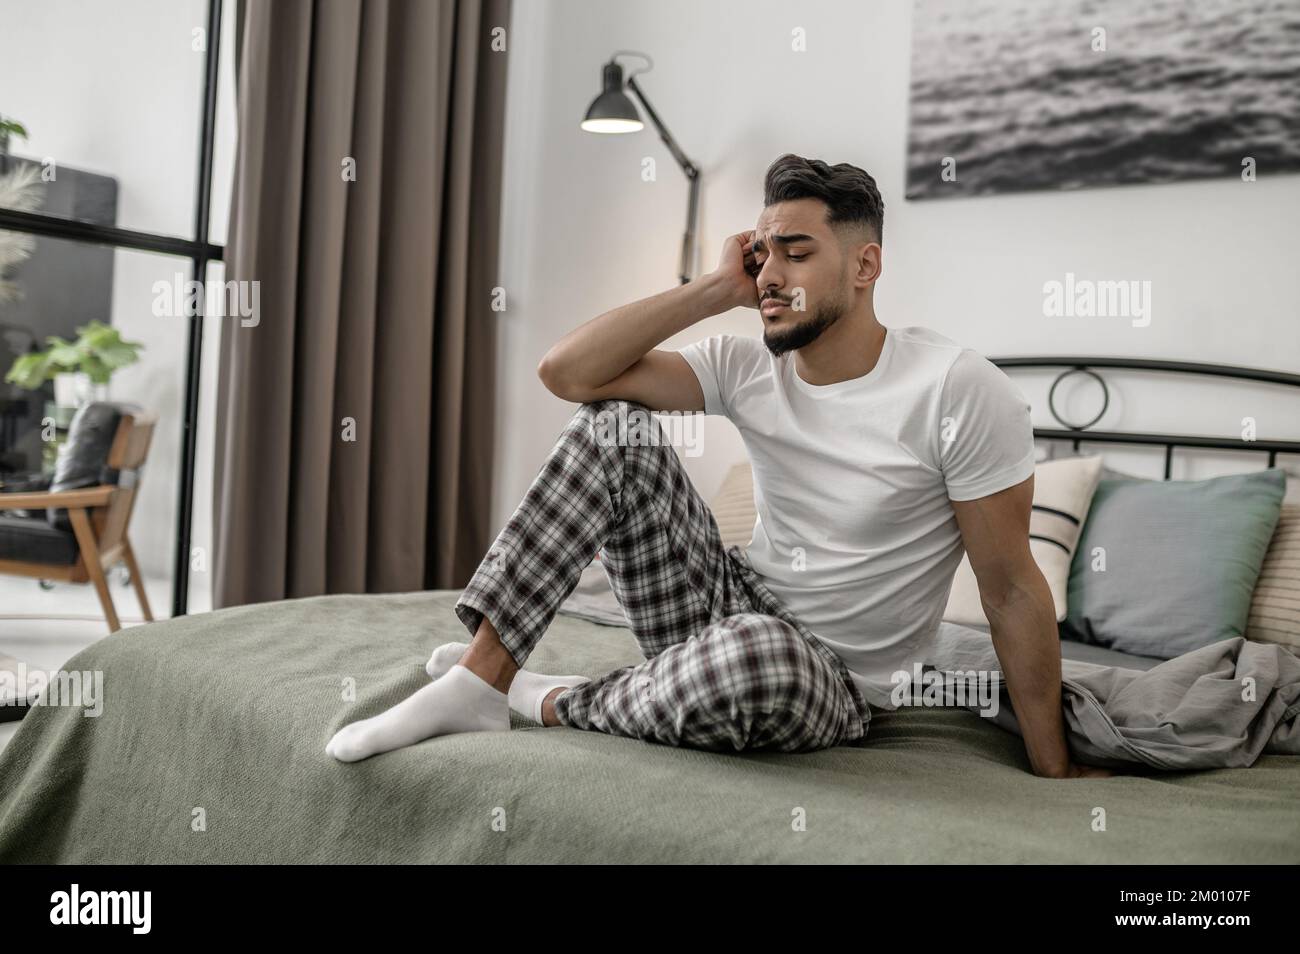 Day off. A man in white tshirt and plaid pants sitting on bed at home. Stock Photo